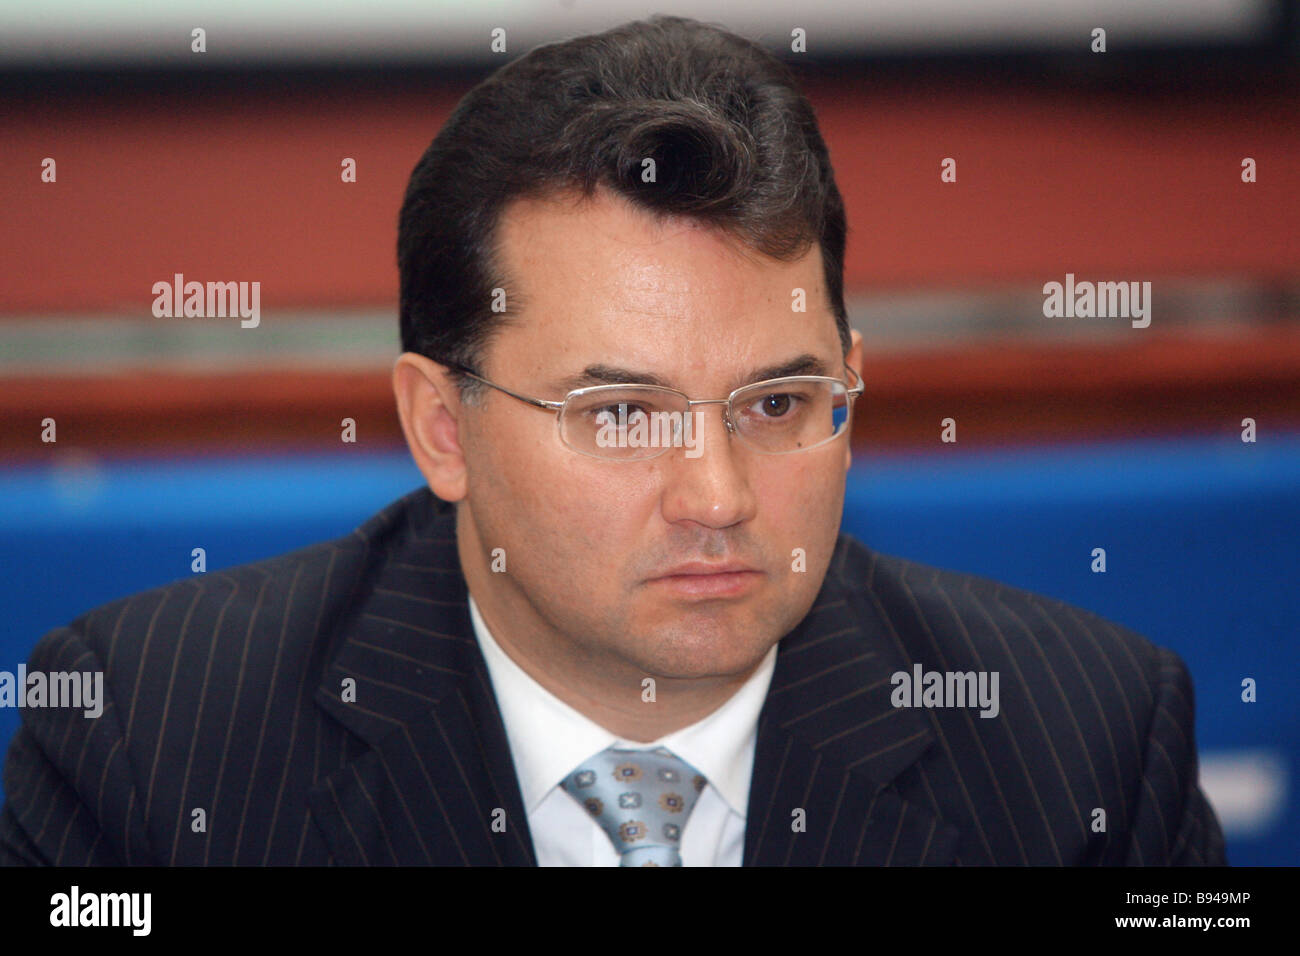 Alexander Pleshakov Transaero Co Directors Board Chair during an enlarge attendance session of the Russian Chamber of Commerce Stock Photo